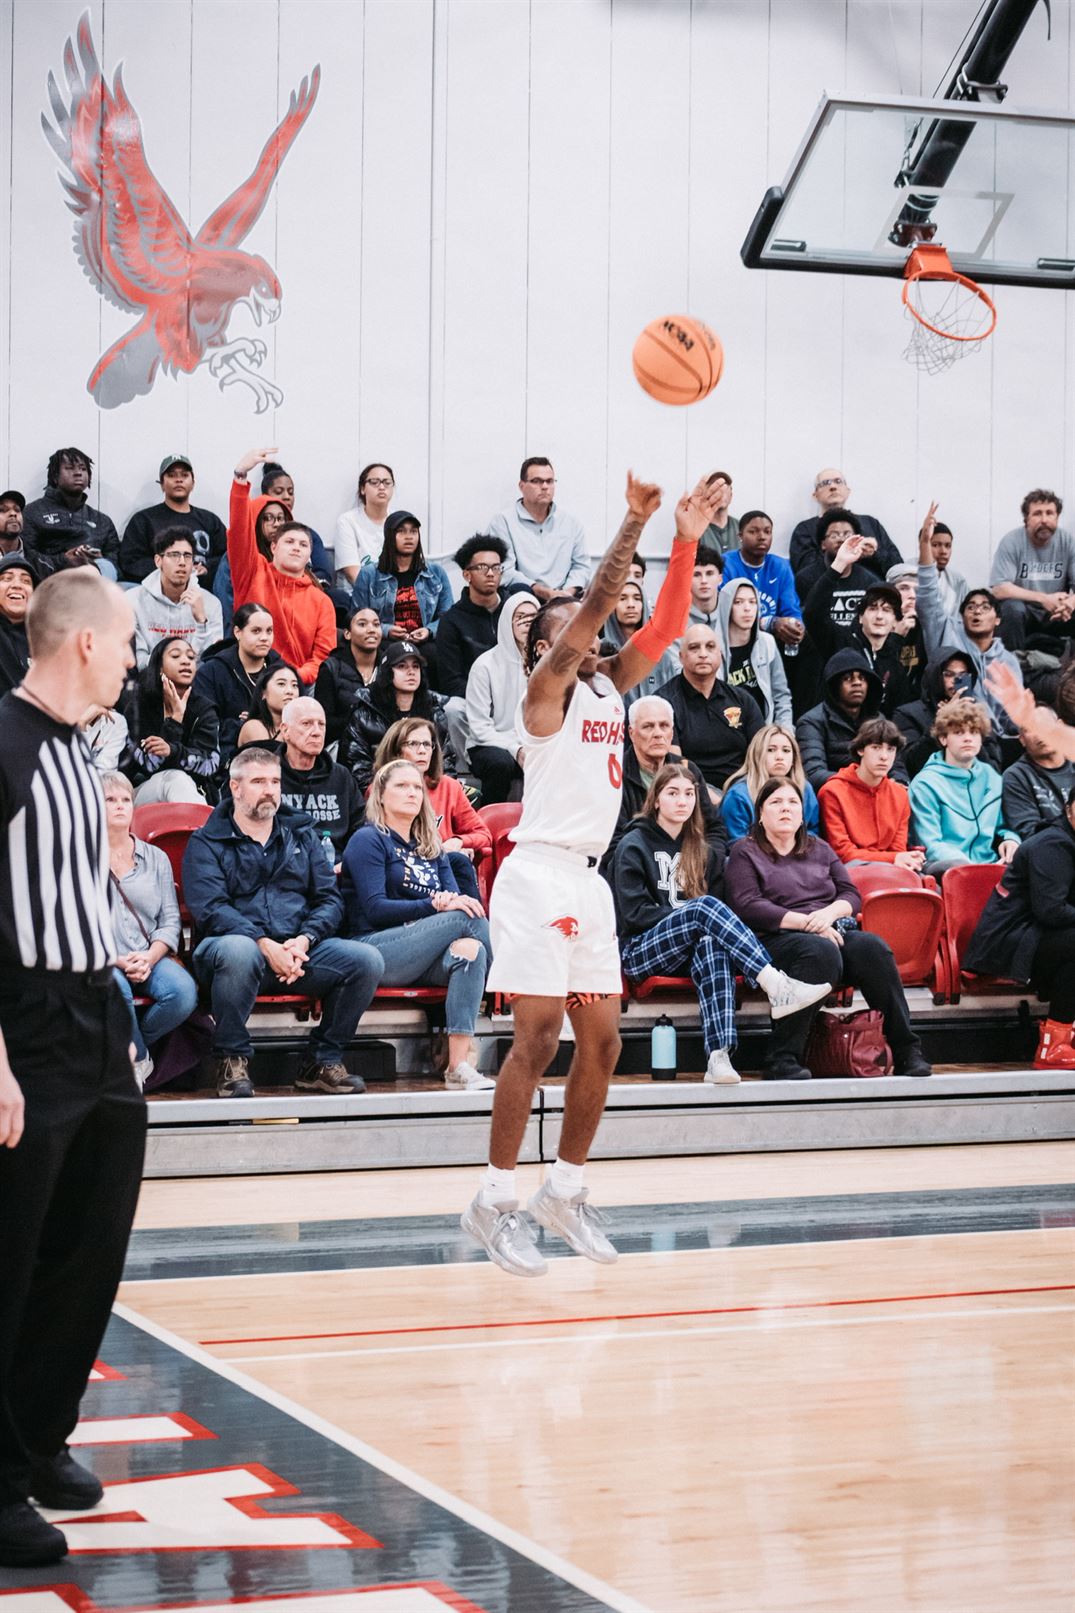 Kyree Henry goes up for a three-pointer with the Panzer crowd behind him rooting him on. Dan Dreisbach | The Montclarion